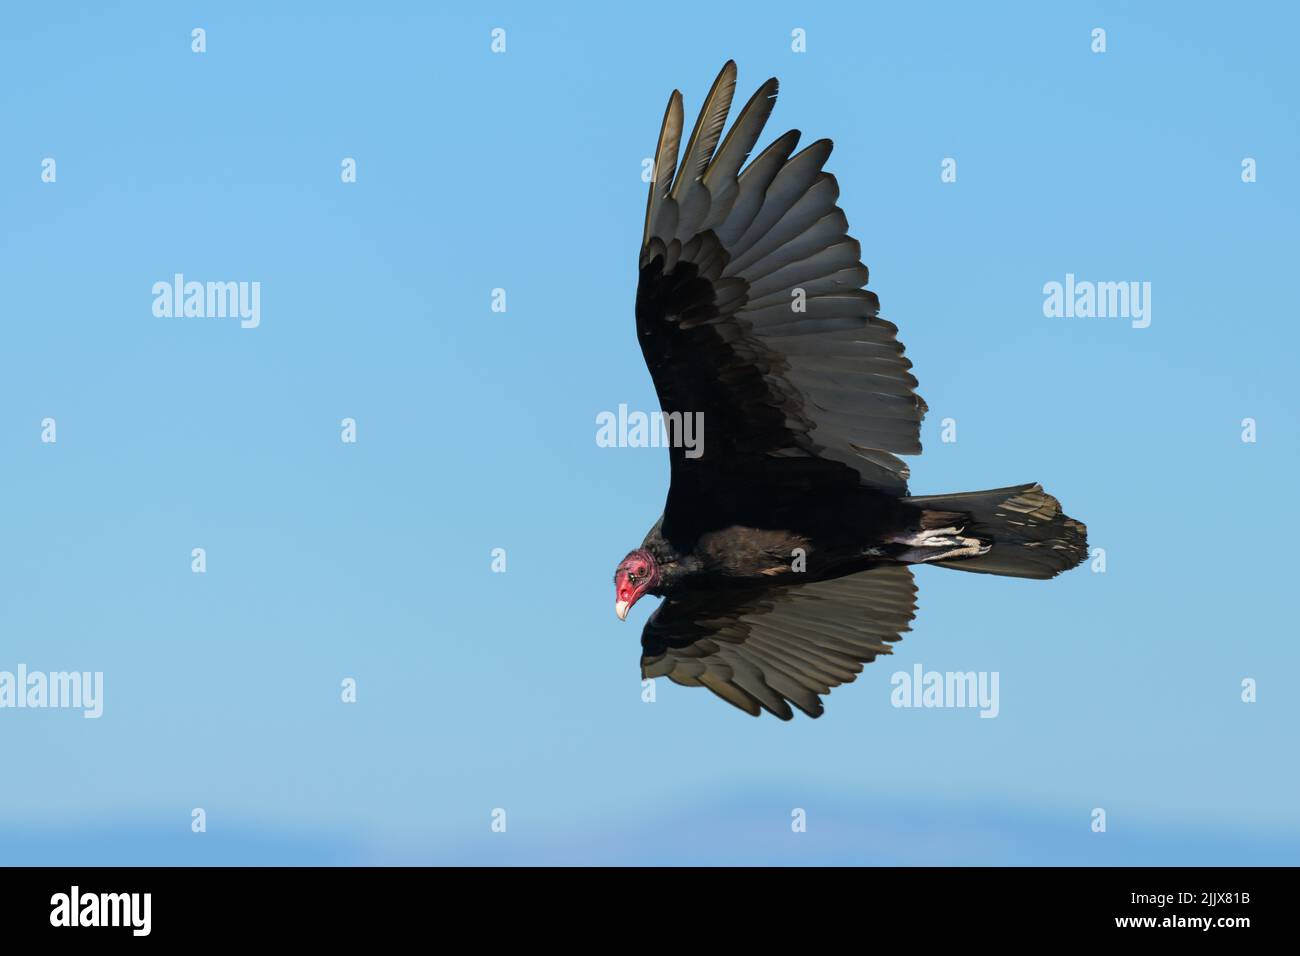 Turkey vulture scanning the ground as it soars above Western Washington on a blue sky day with red head visible and tail and wings extended Stock Photo